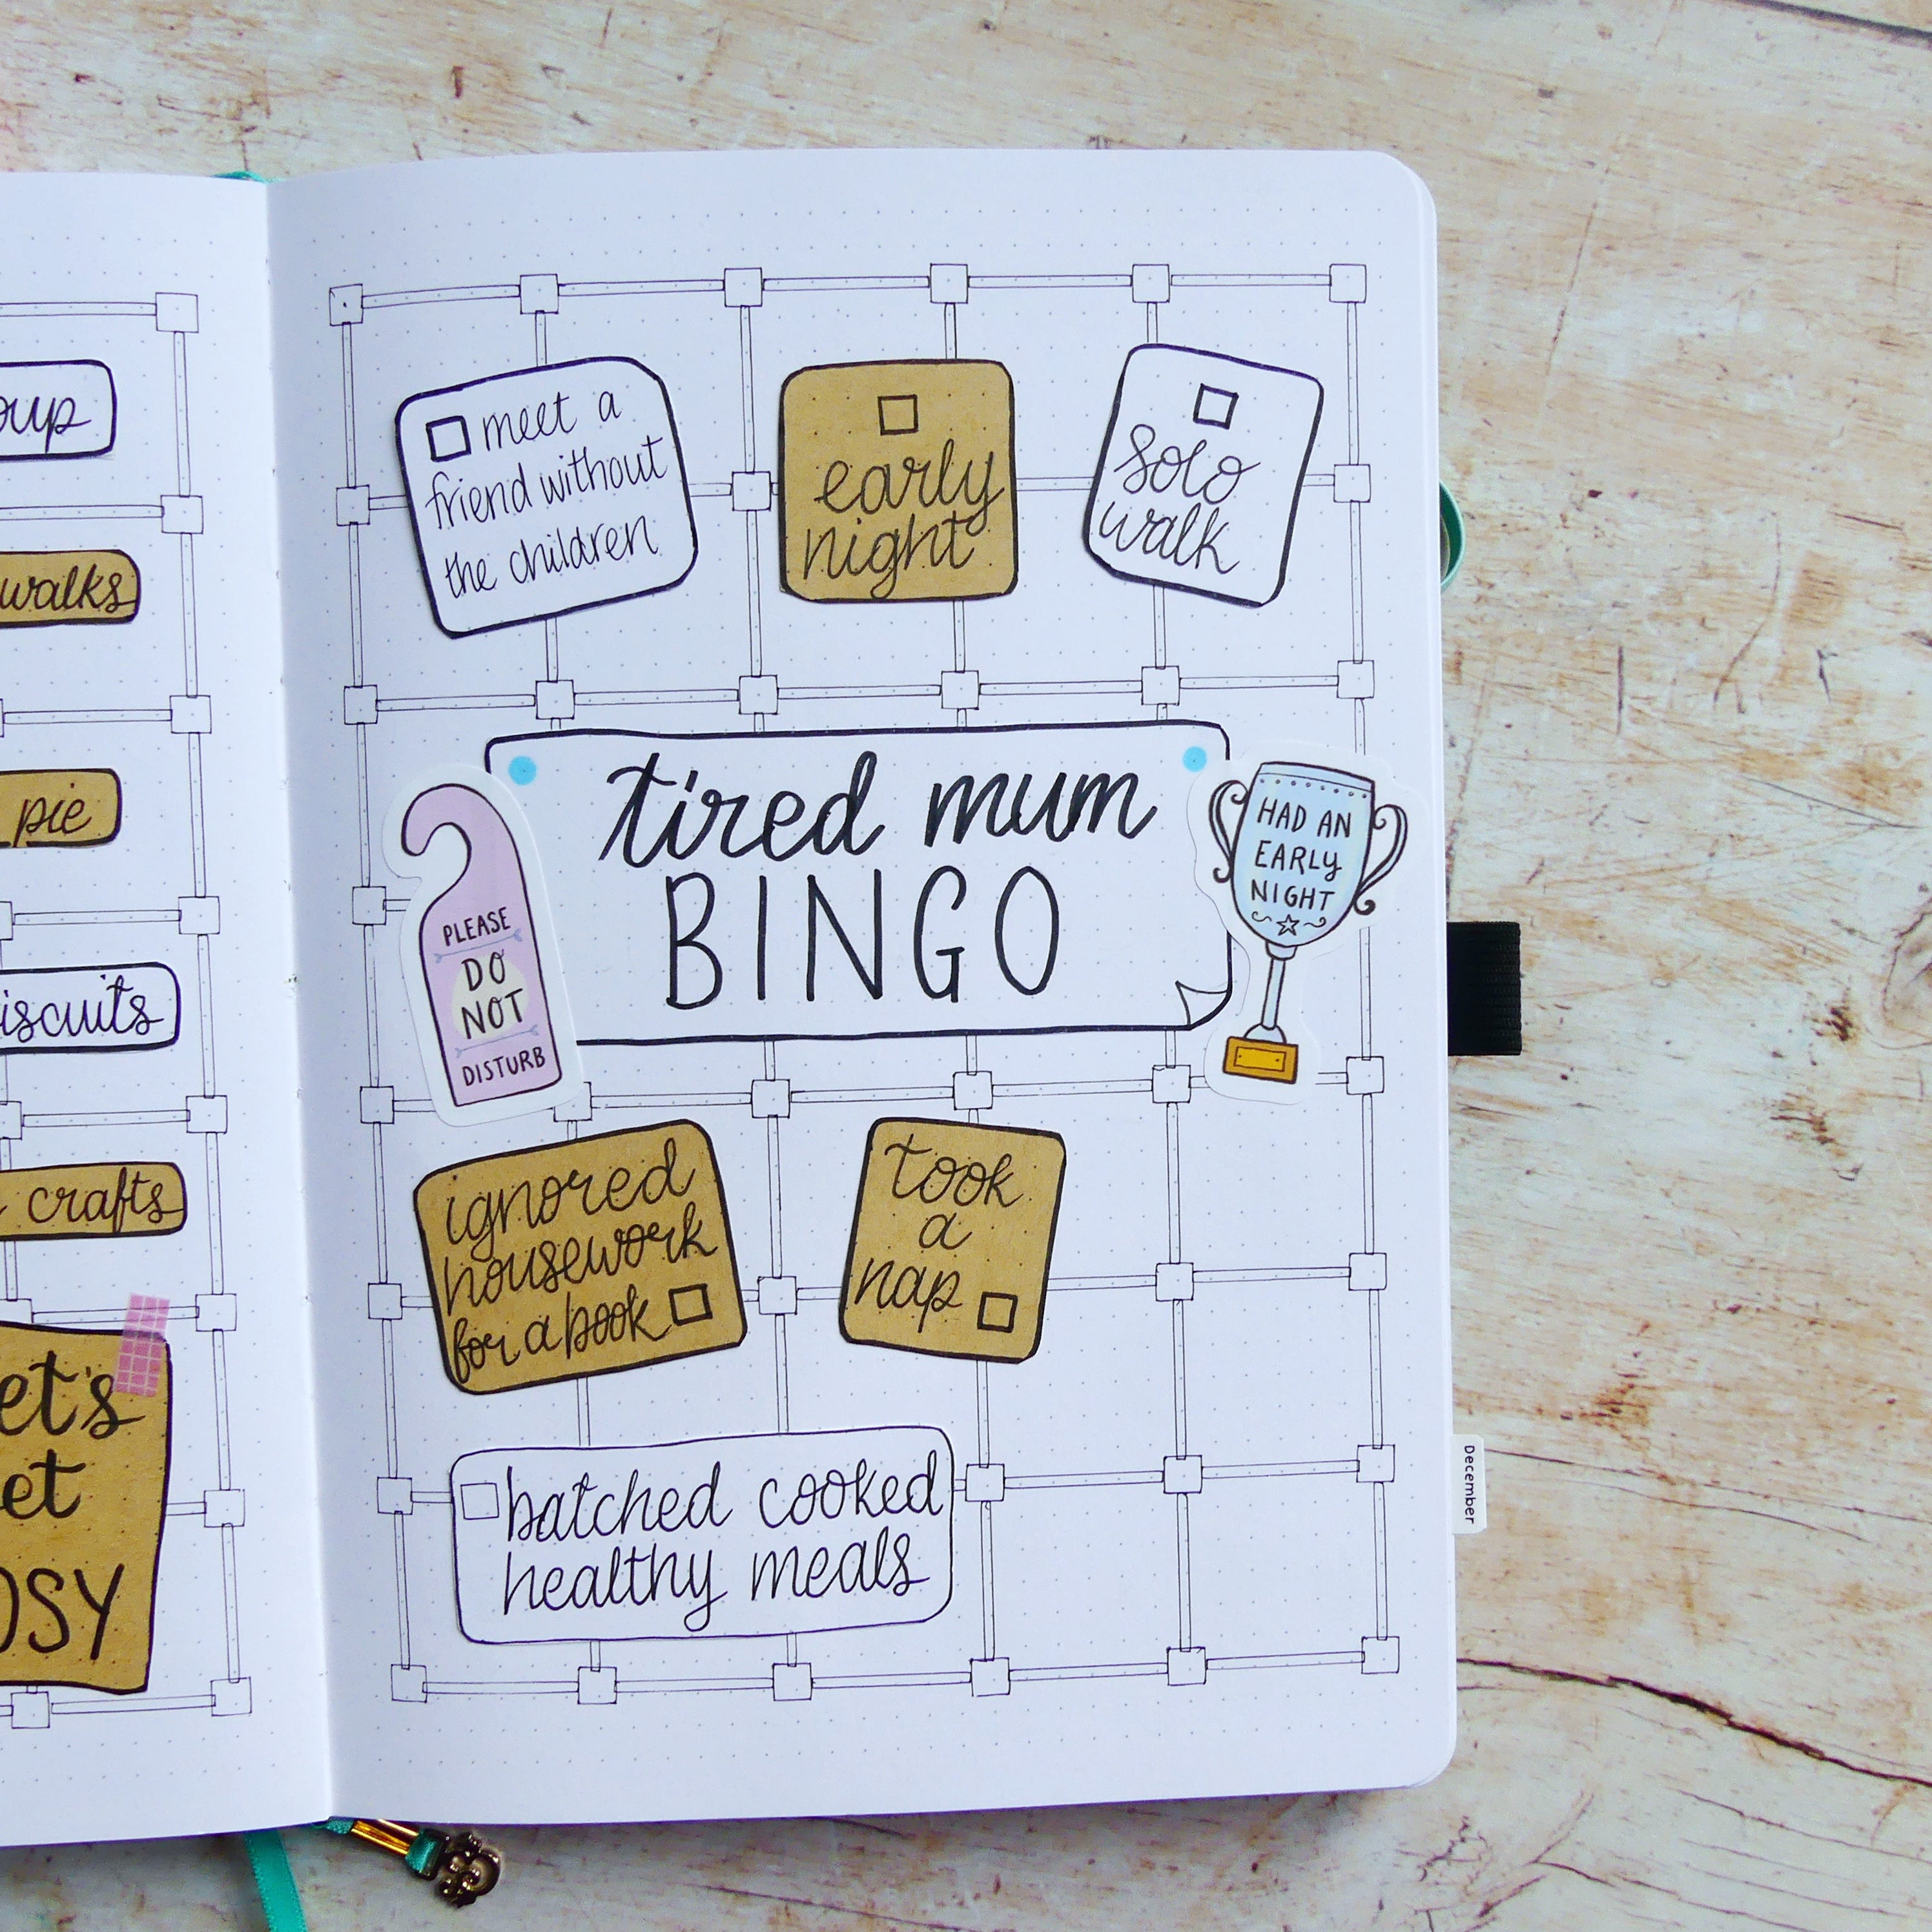 Tired mum bingo pages with ideas on Kraft paper